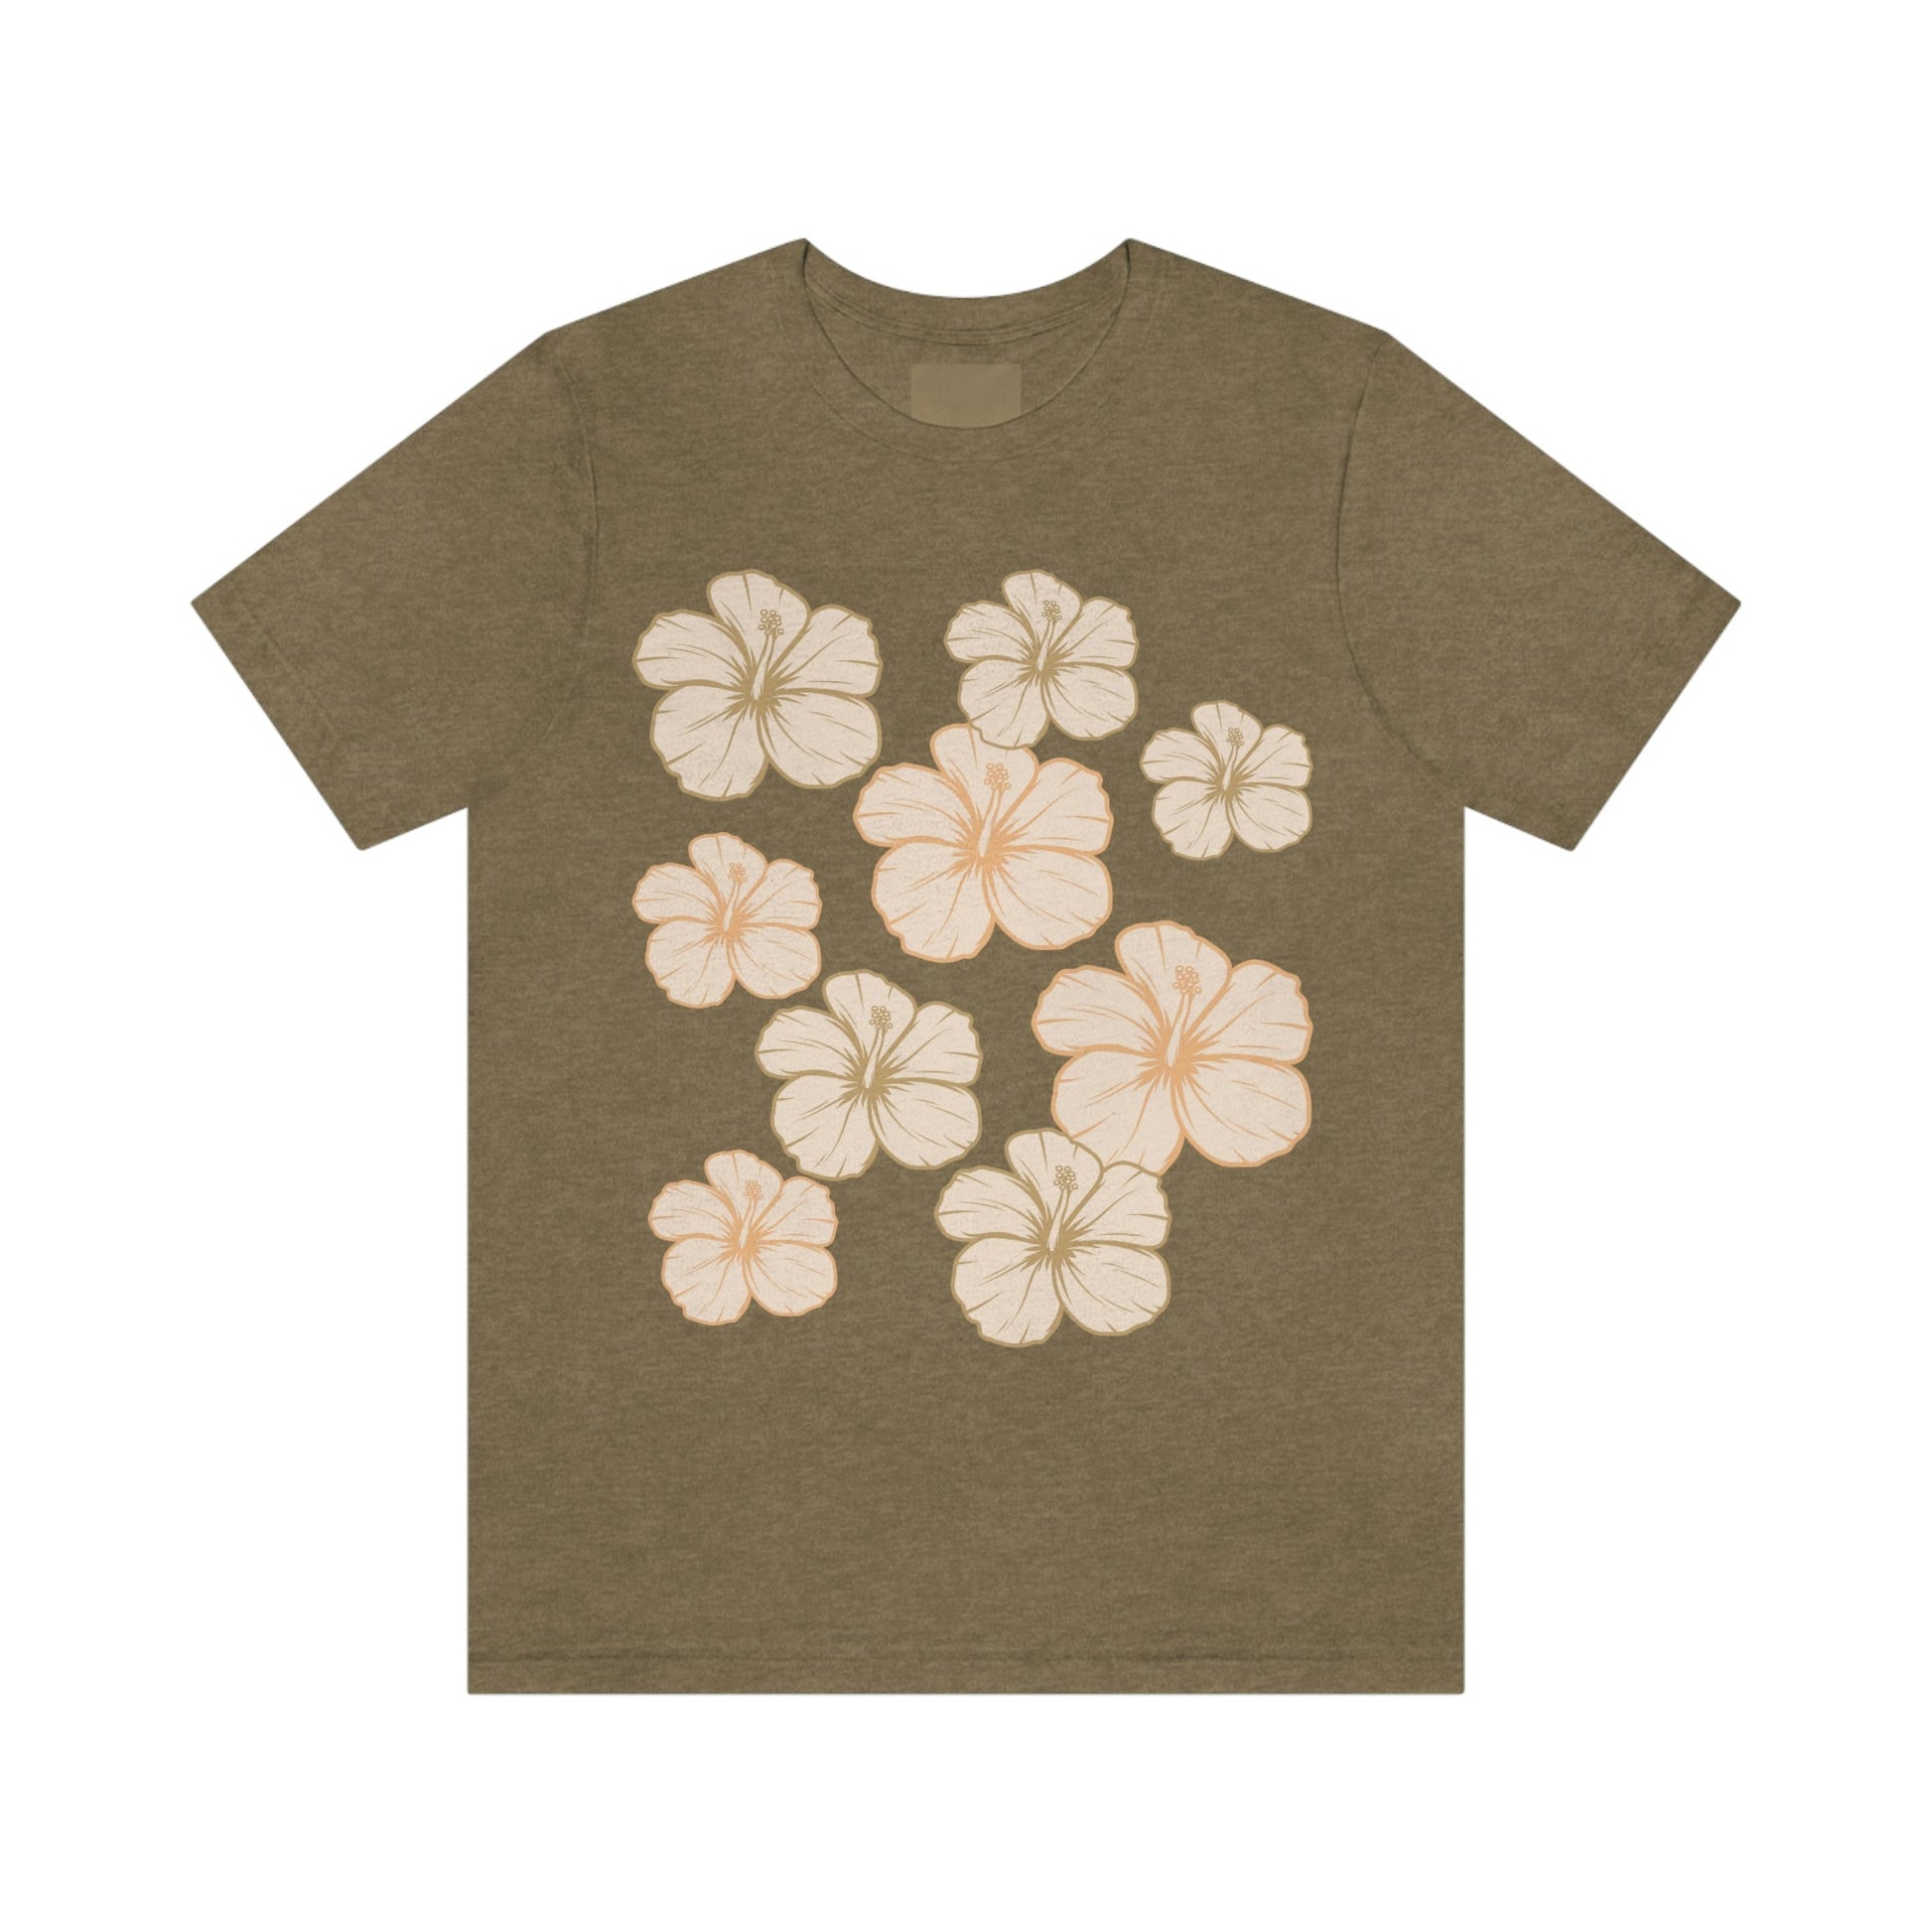 HIbiscus All Over Unisex Jersey Tee - Global Village Kailua Boutique